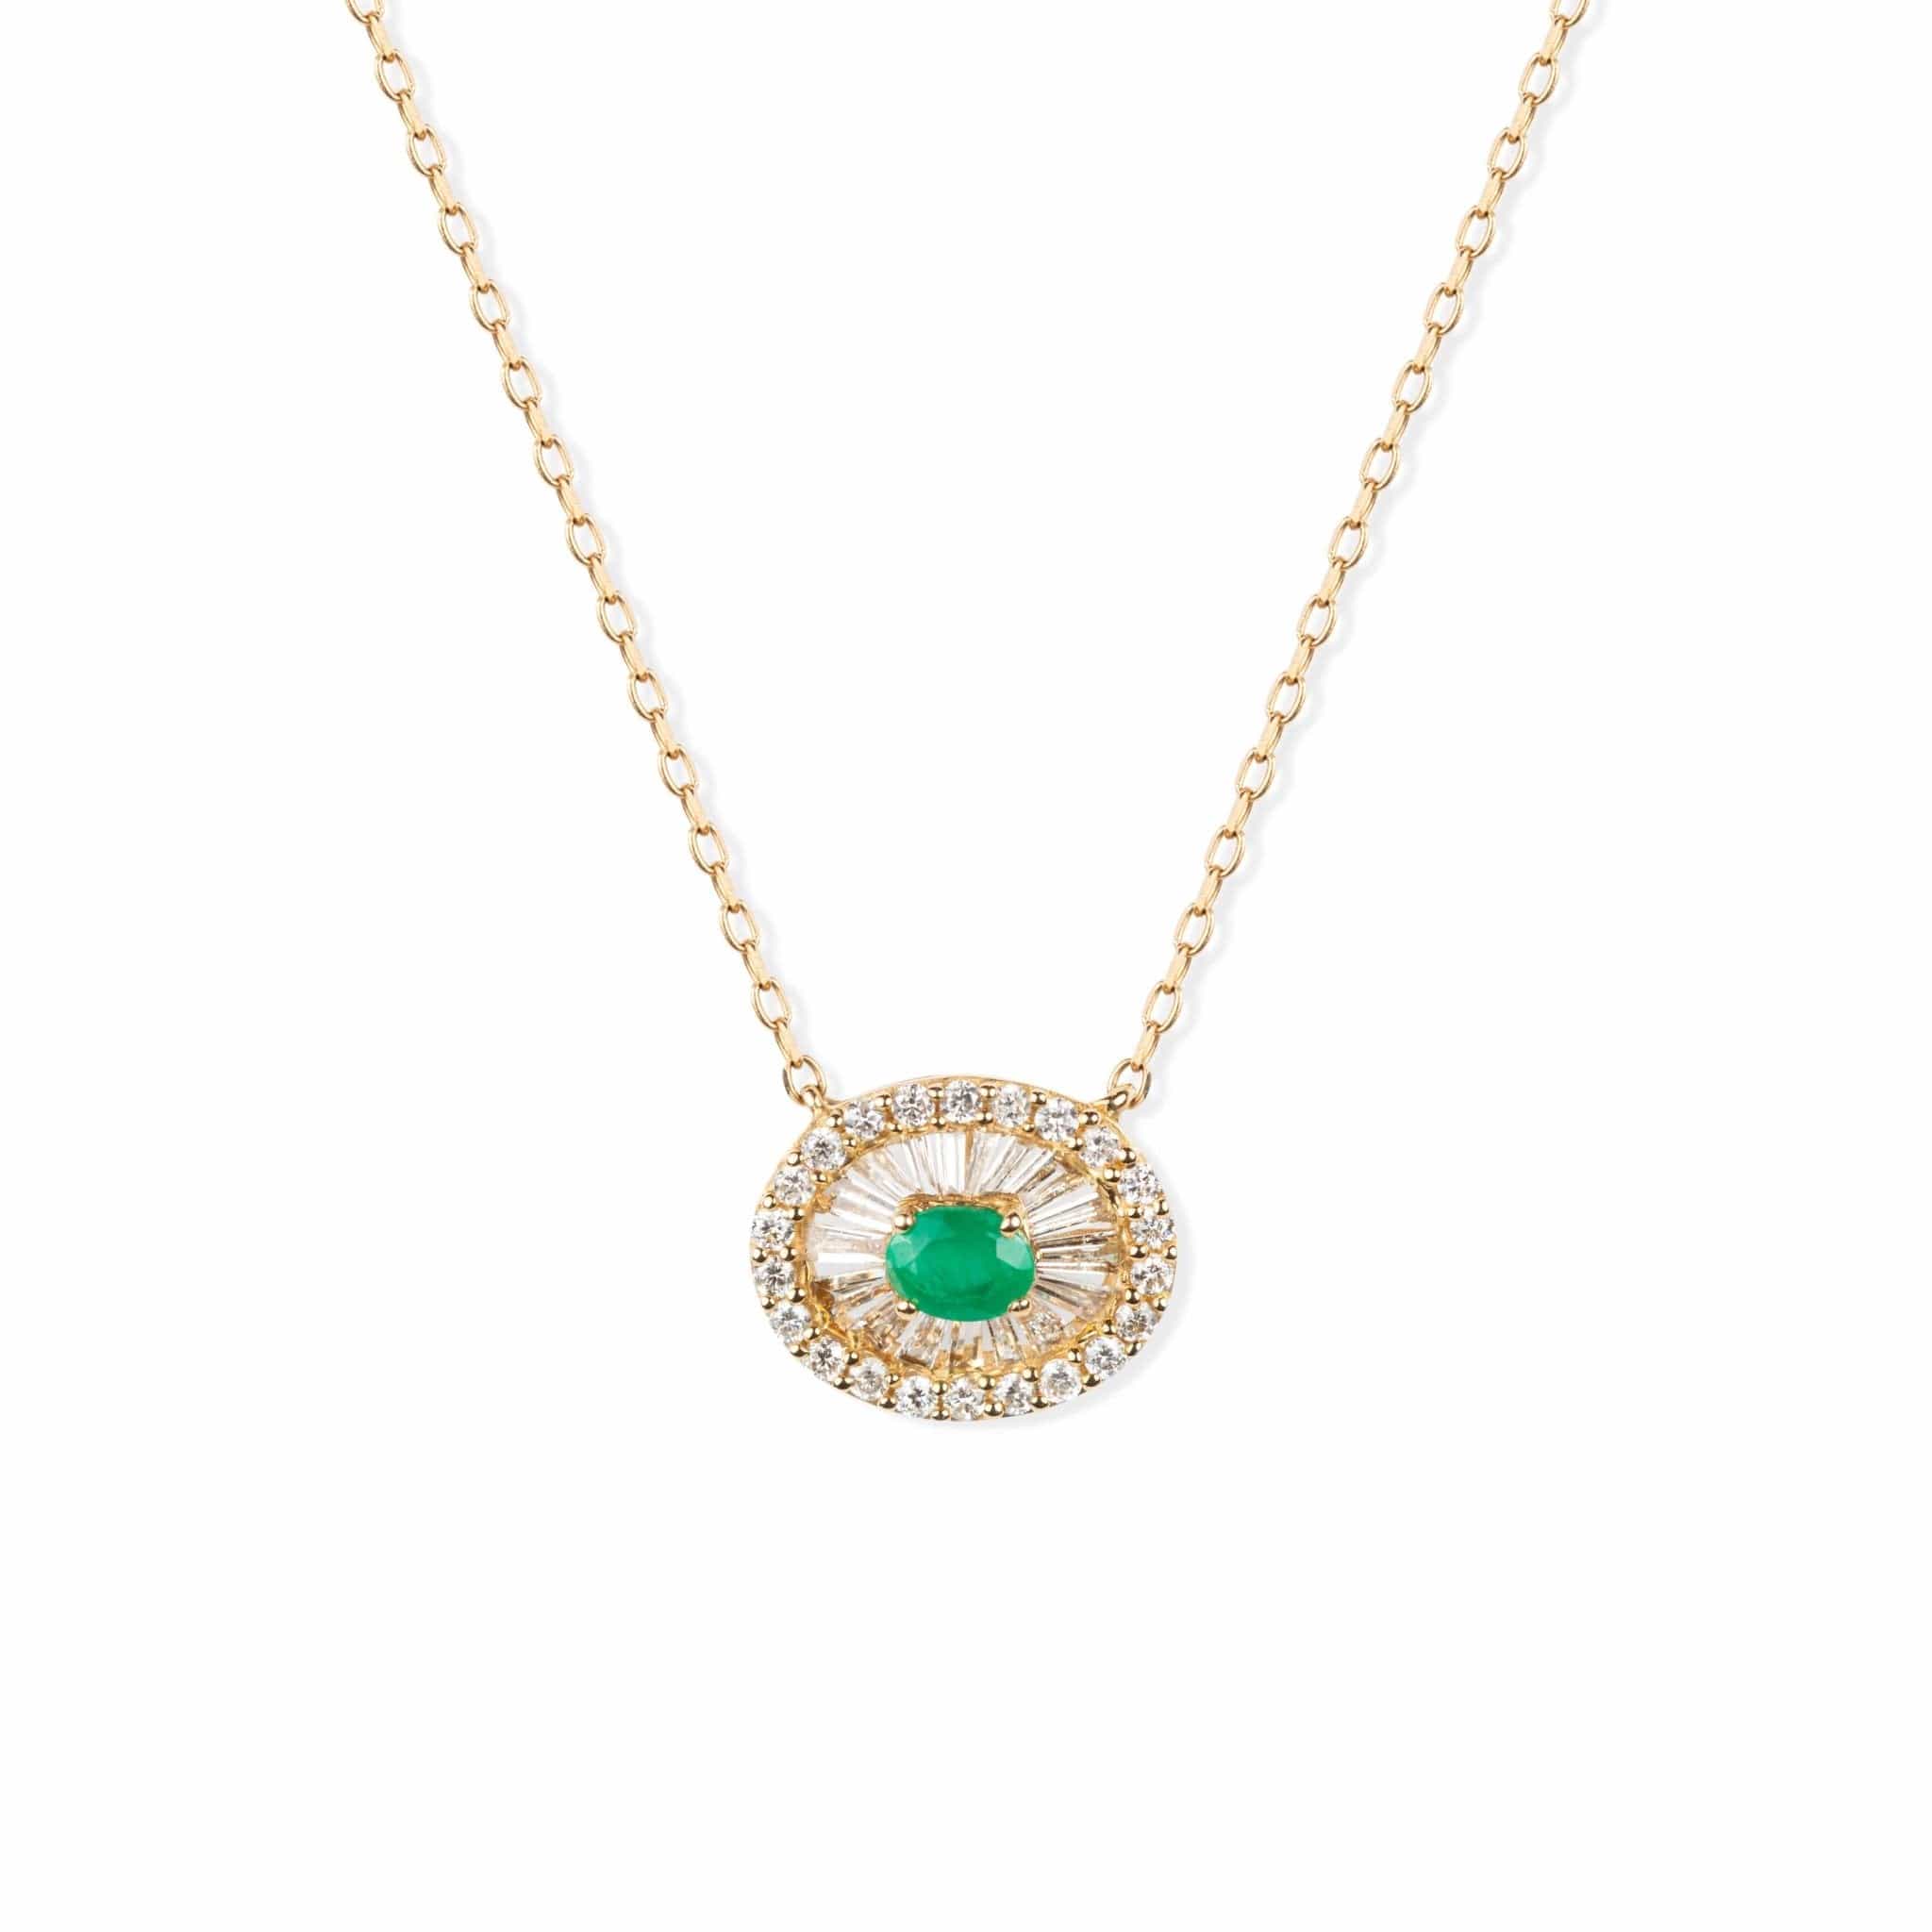 Diamonds and Emeralds Necklace - M.Fitaihi